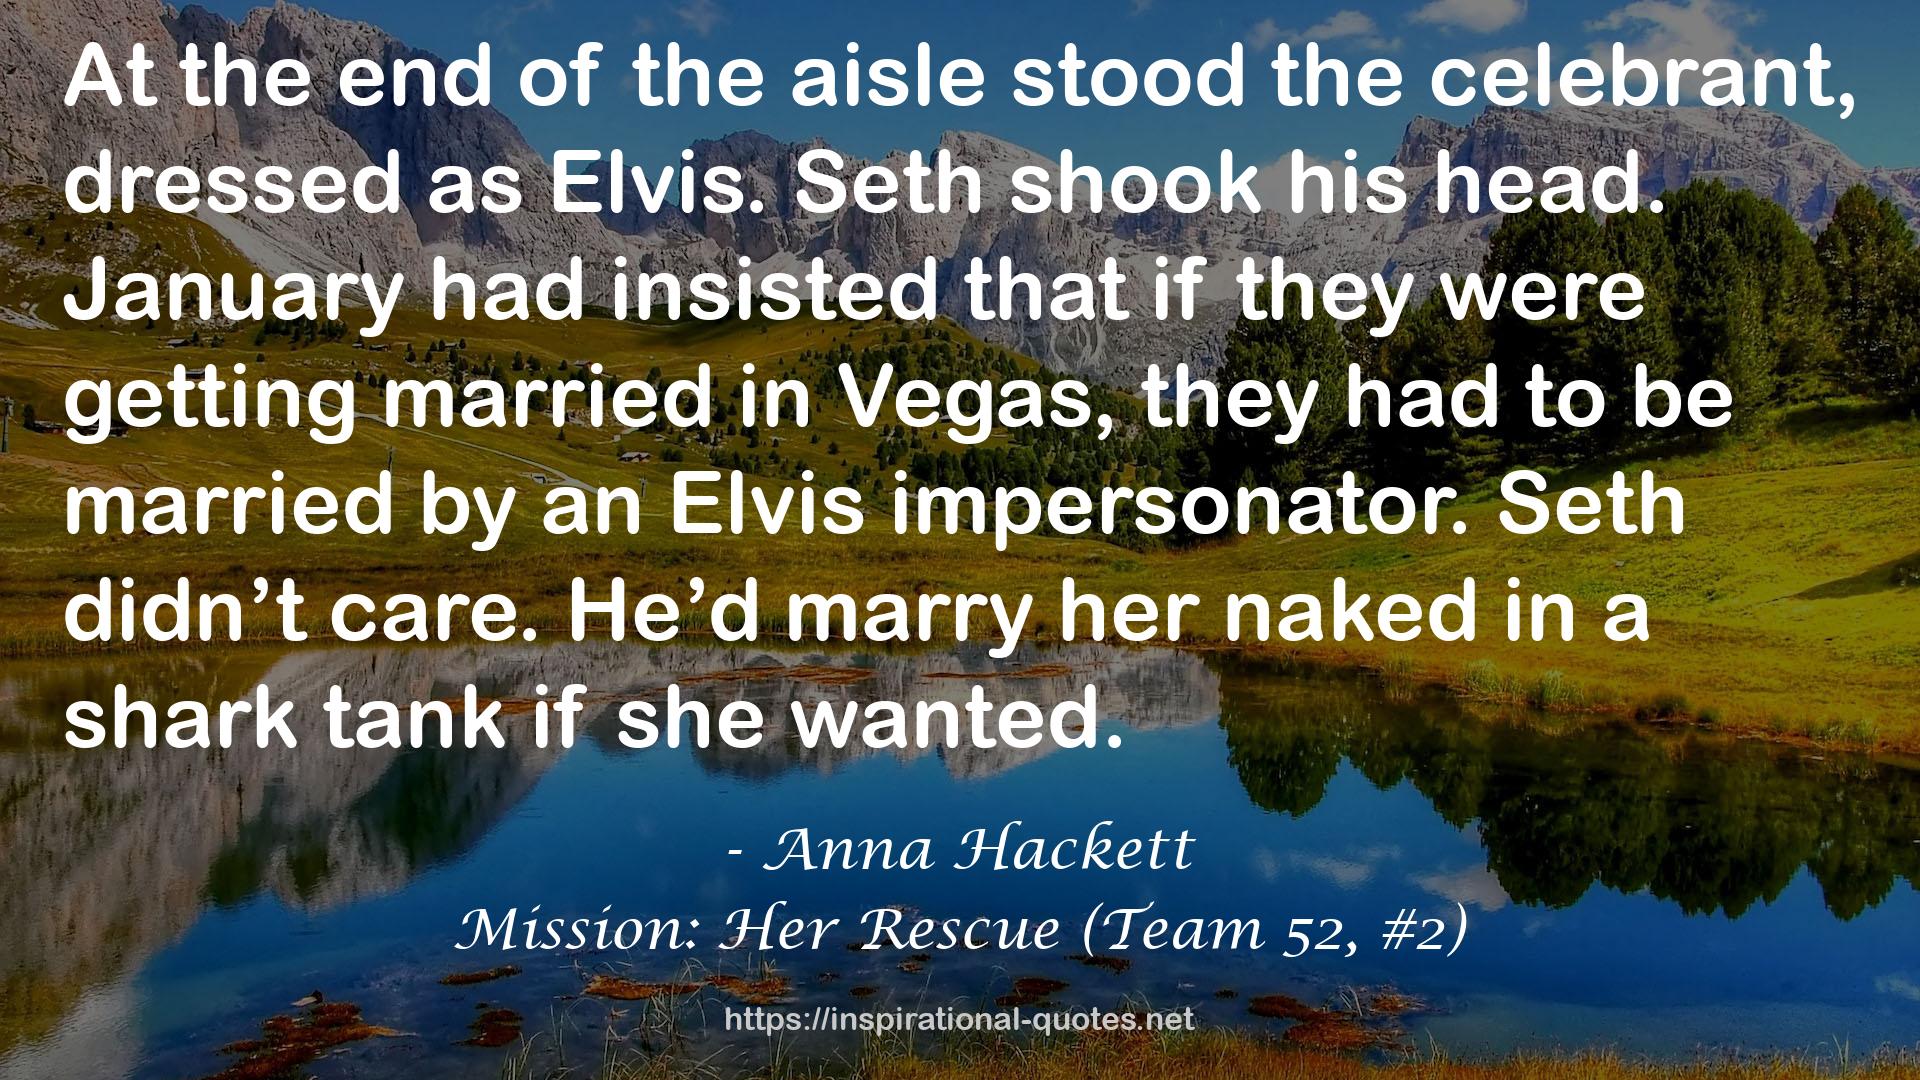 Mission: Her Rescue (Team 52, #2) QUOTES